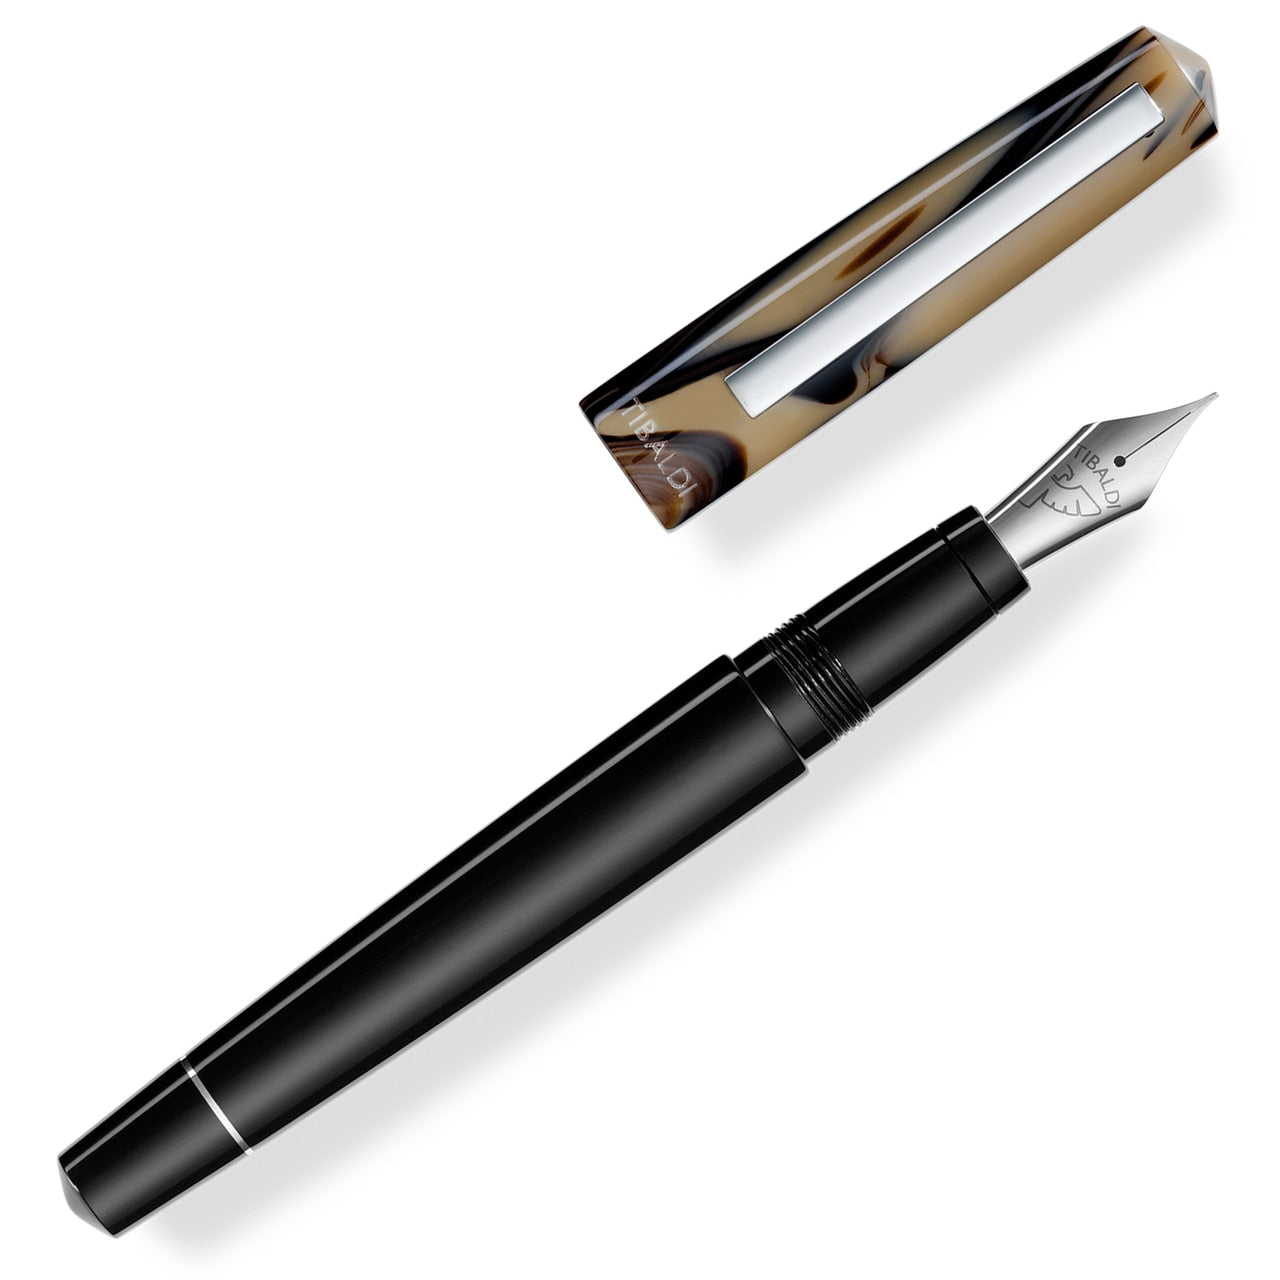 Today’s collections of pens form a powerful shortlist of iconic pieces from the archives, blending streetstyle trends with fashion metrics.  These high quality pens are made from metal and acrylics, with steel and gold